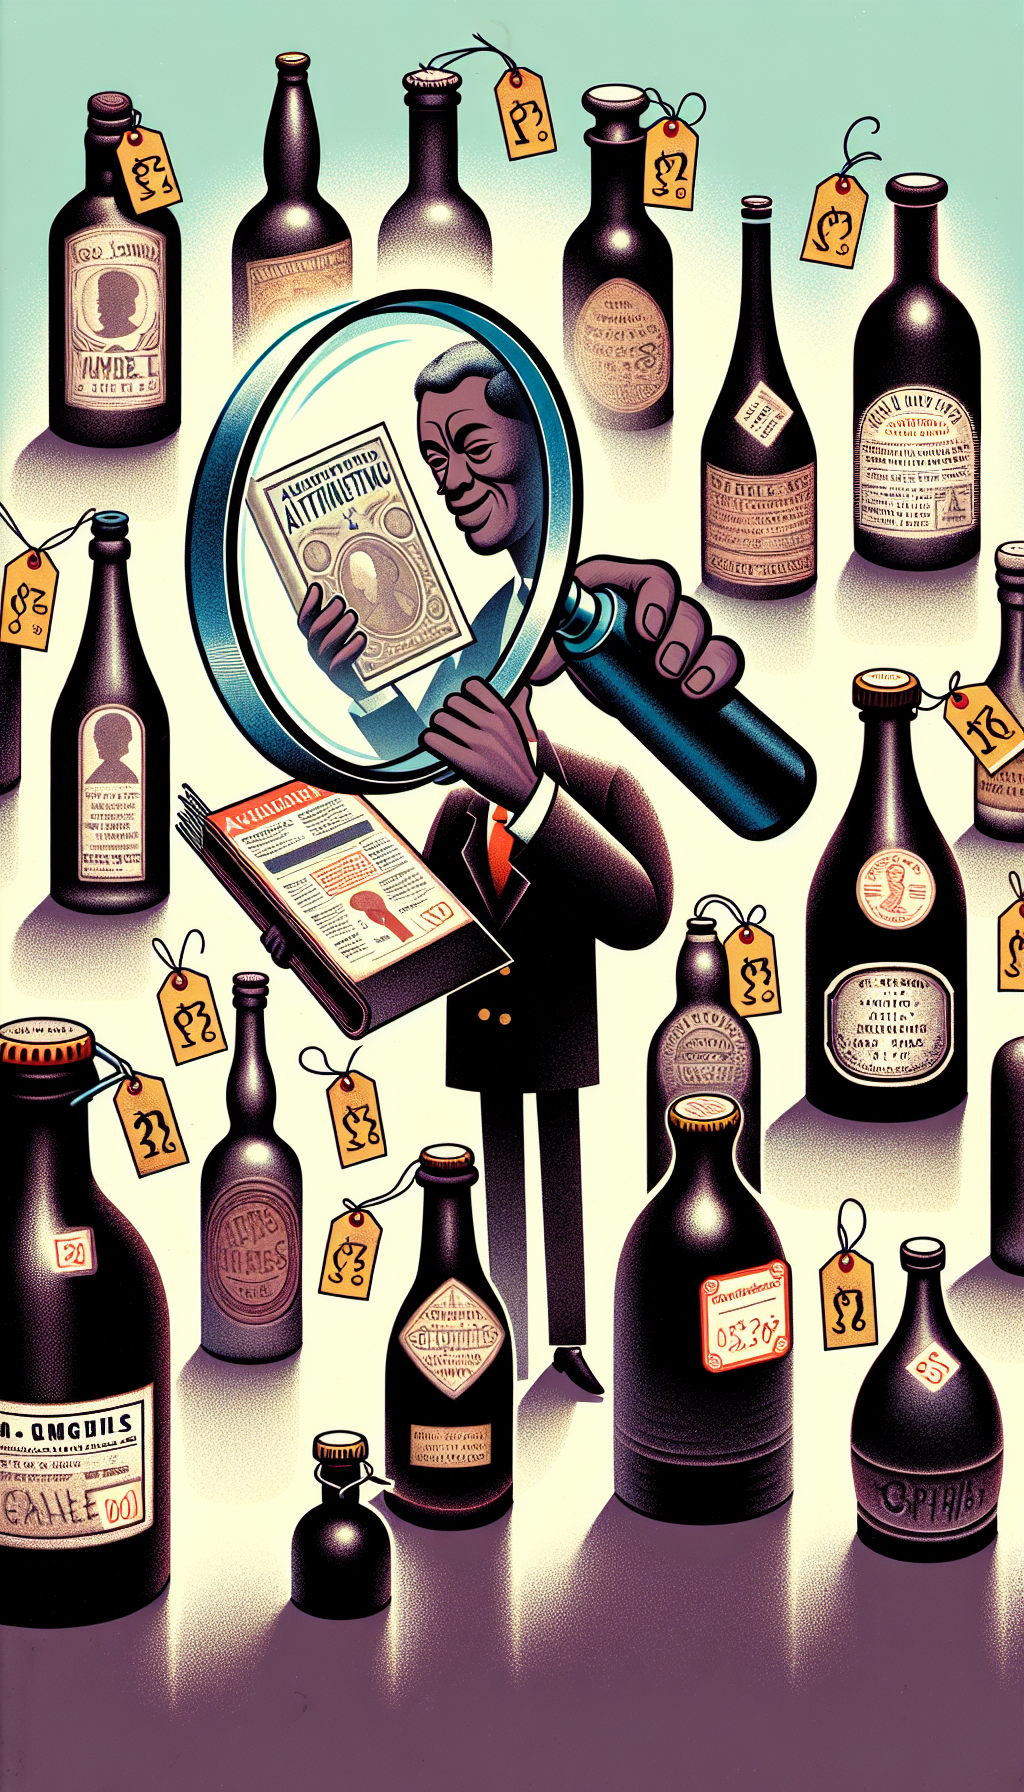 An illustration featuring a magnifying glass revealing hidden marks on a collection of vintage bottles, each with a distinct style—etched, stamped, or paper-labeled. Some bottles cast shadowy price tags, while a character depicted as a seasoned collector holds a guidebook visibly titled "Authenticating & Valuing," with notes and question marks floating around, symbolizing the research process.